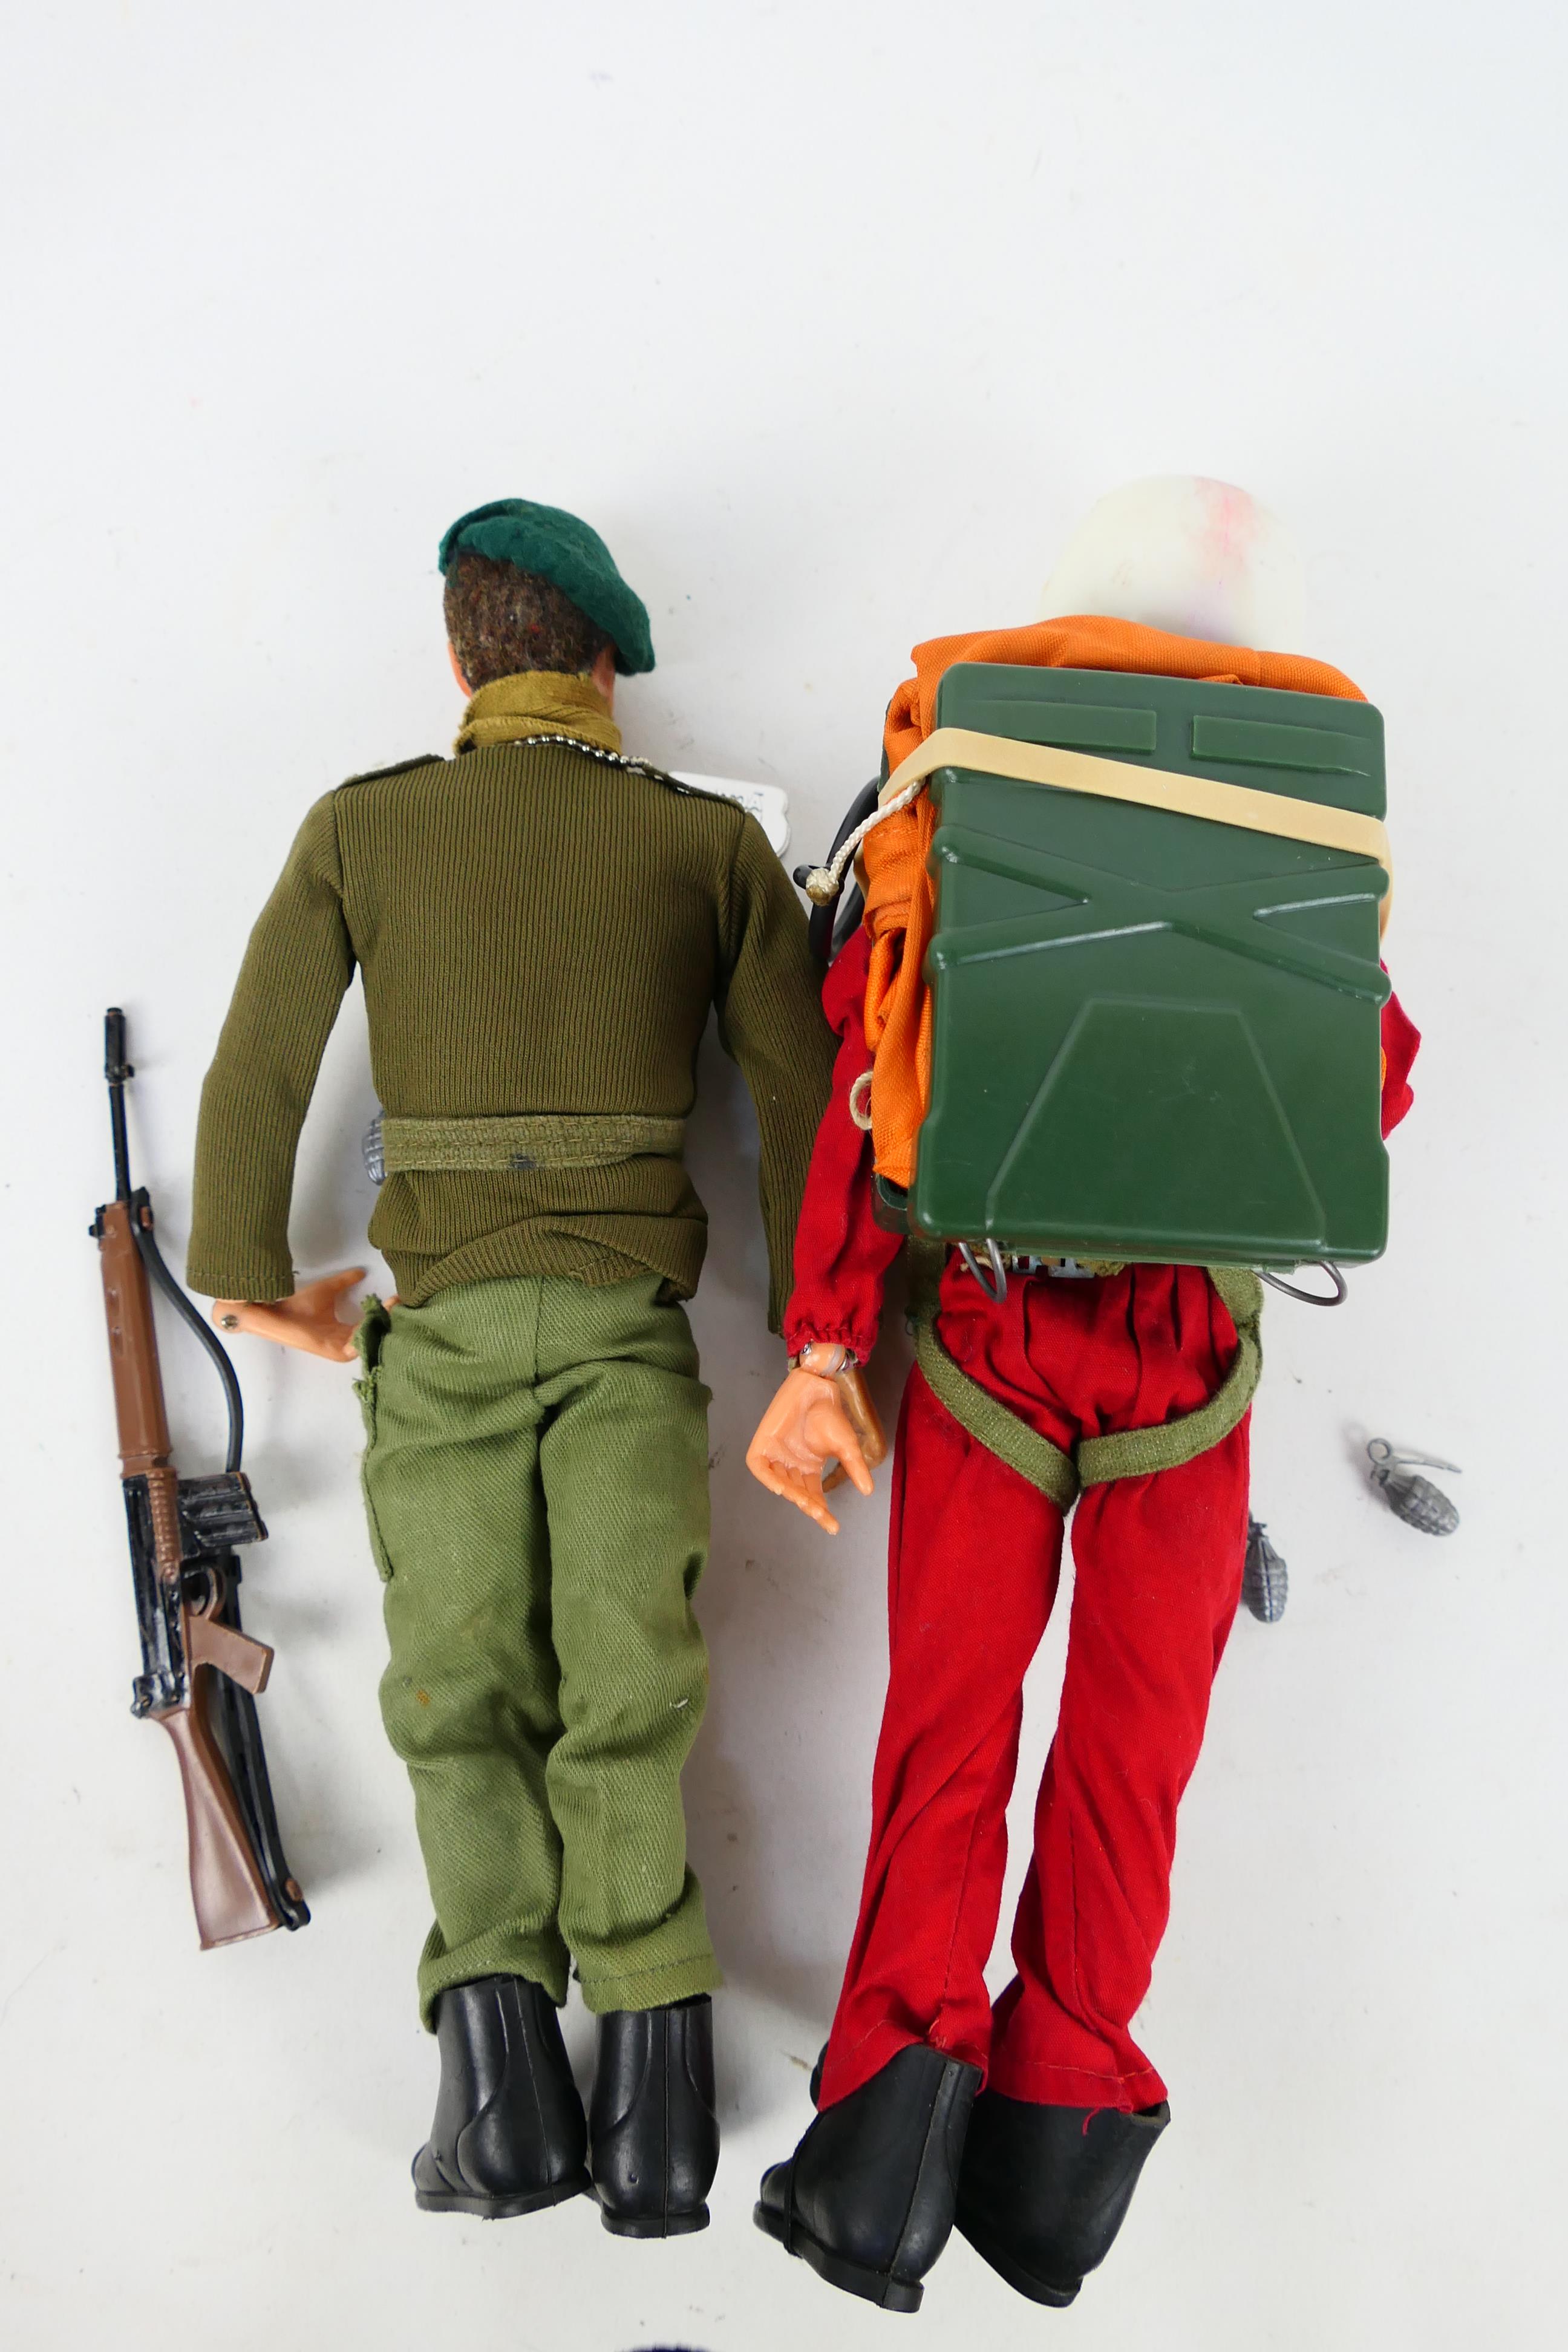 Palitoy - Action Man - Two unboxed vintage Action Man figures in Soldier and RedDevil Parachutist - Image 7 of 7